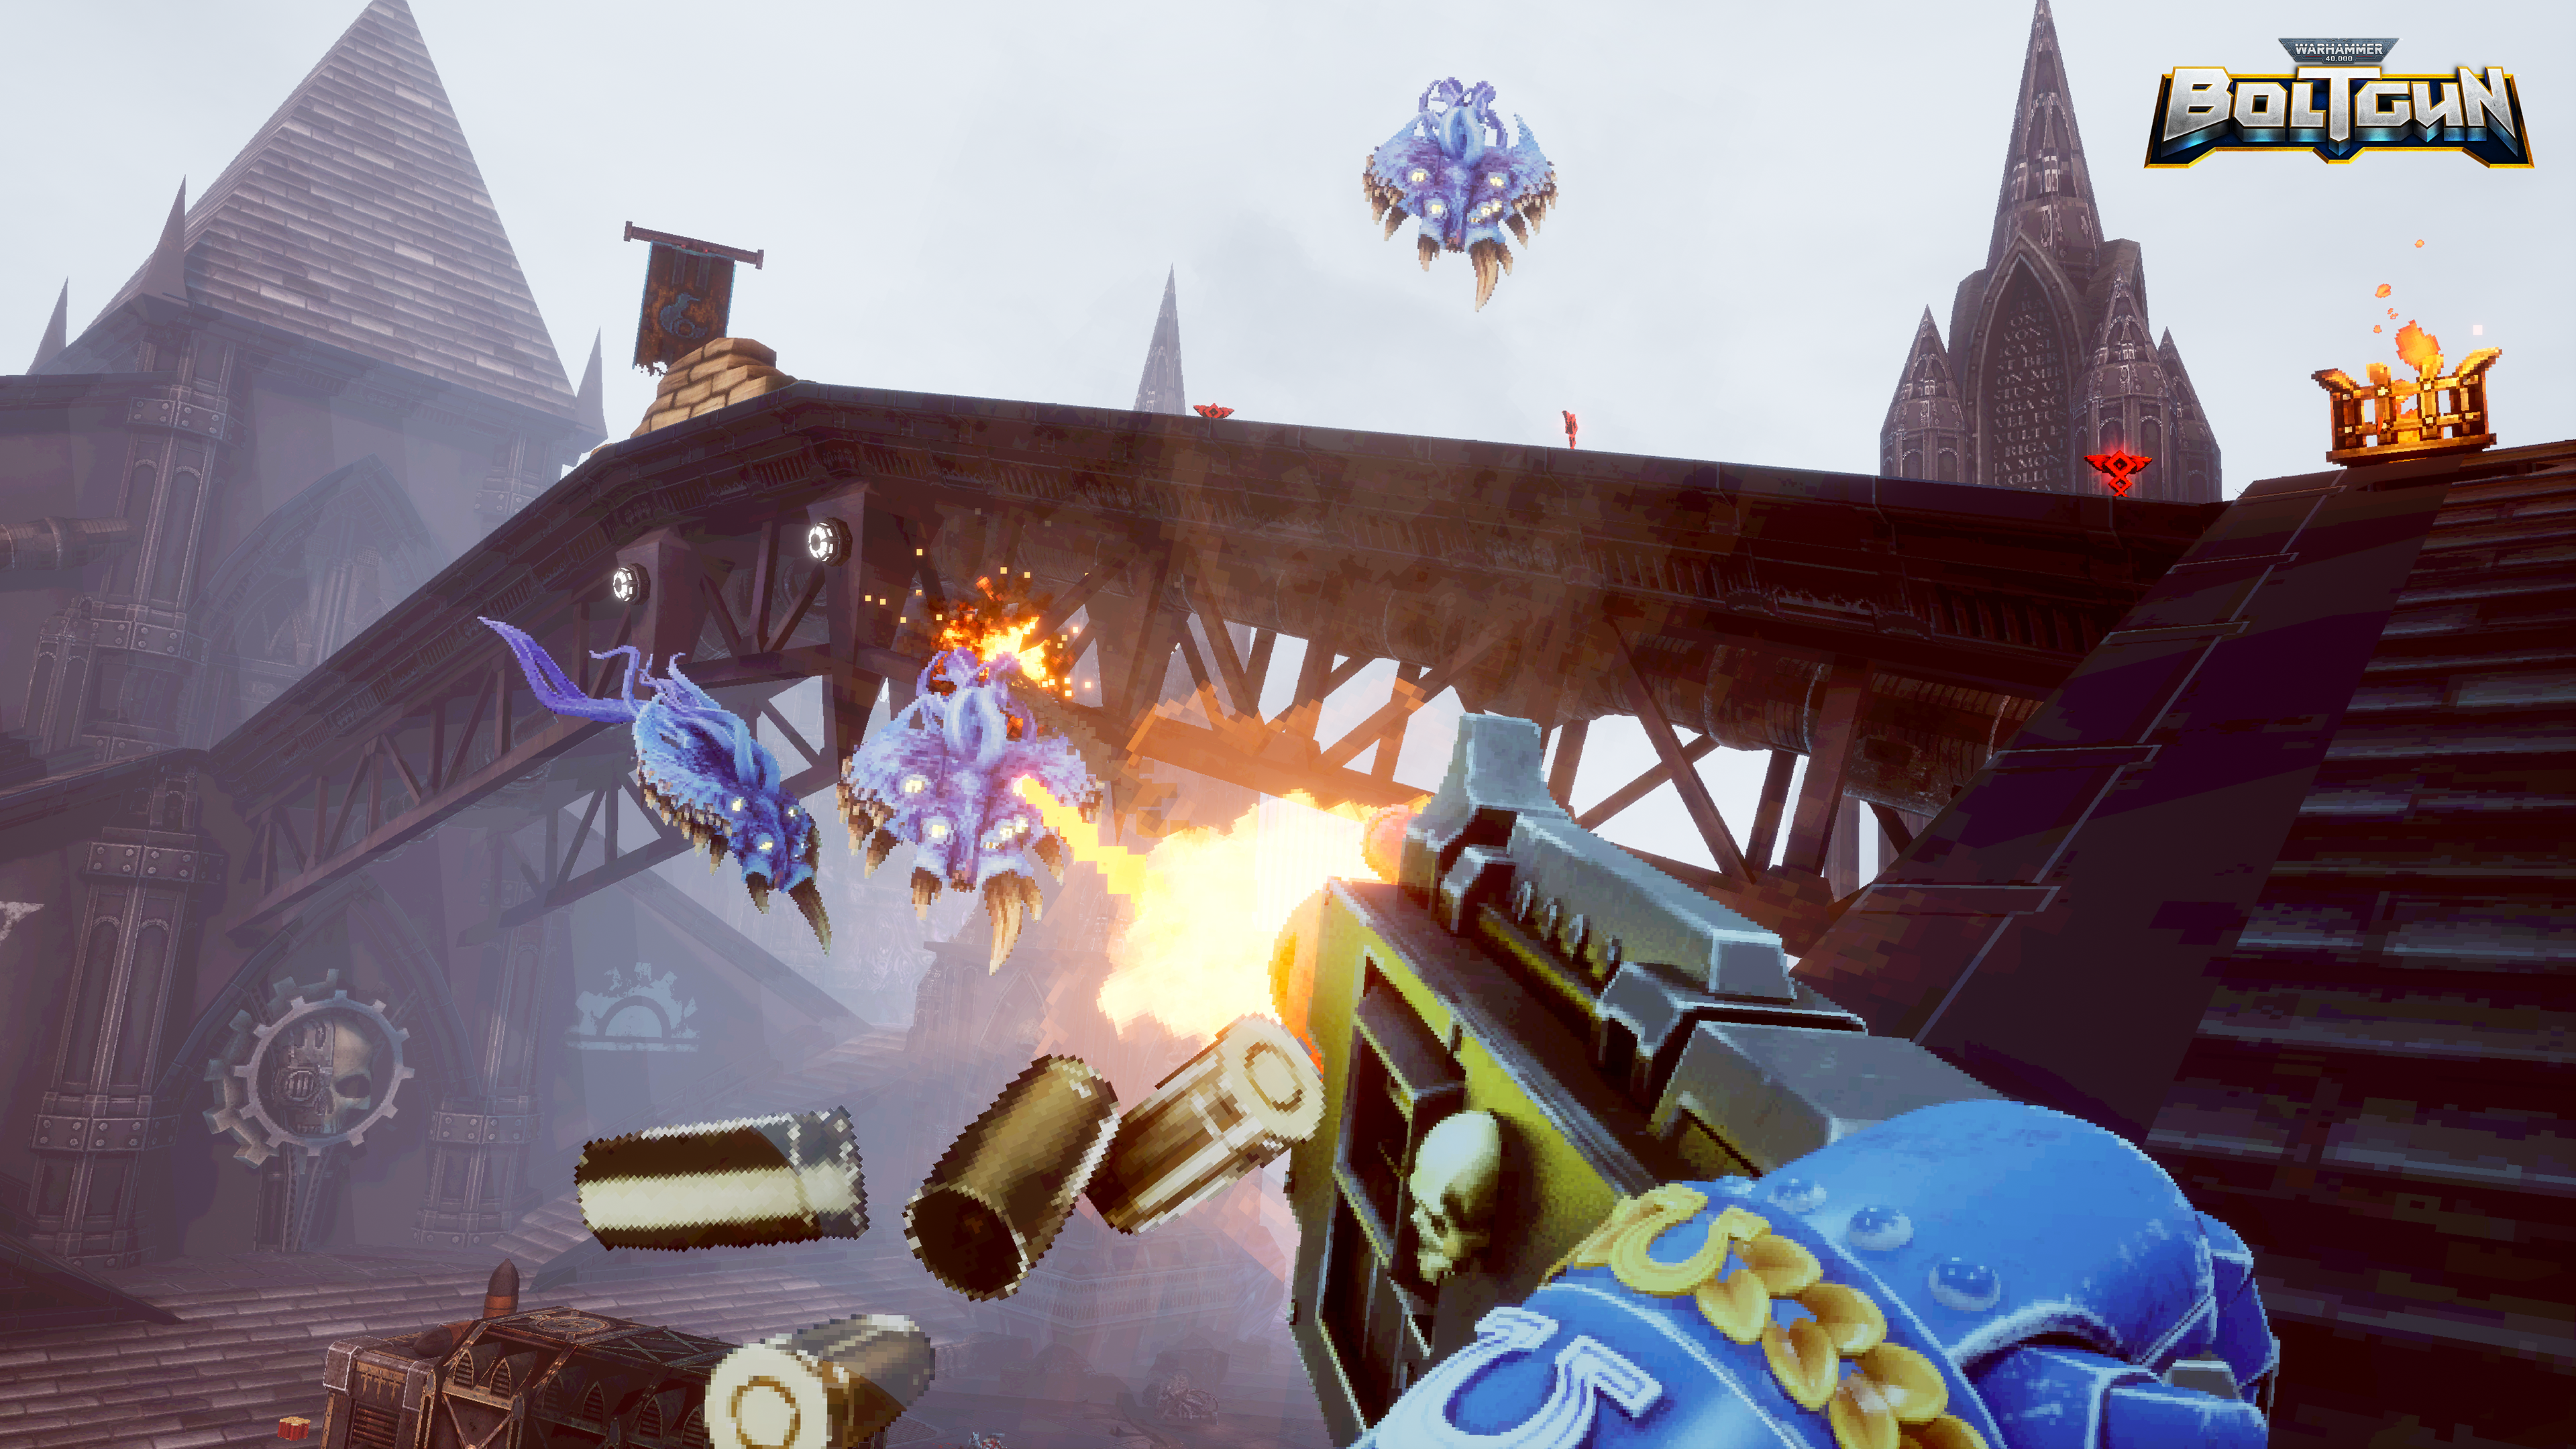  Boltgun, showing the player fighting enemies in-game.